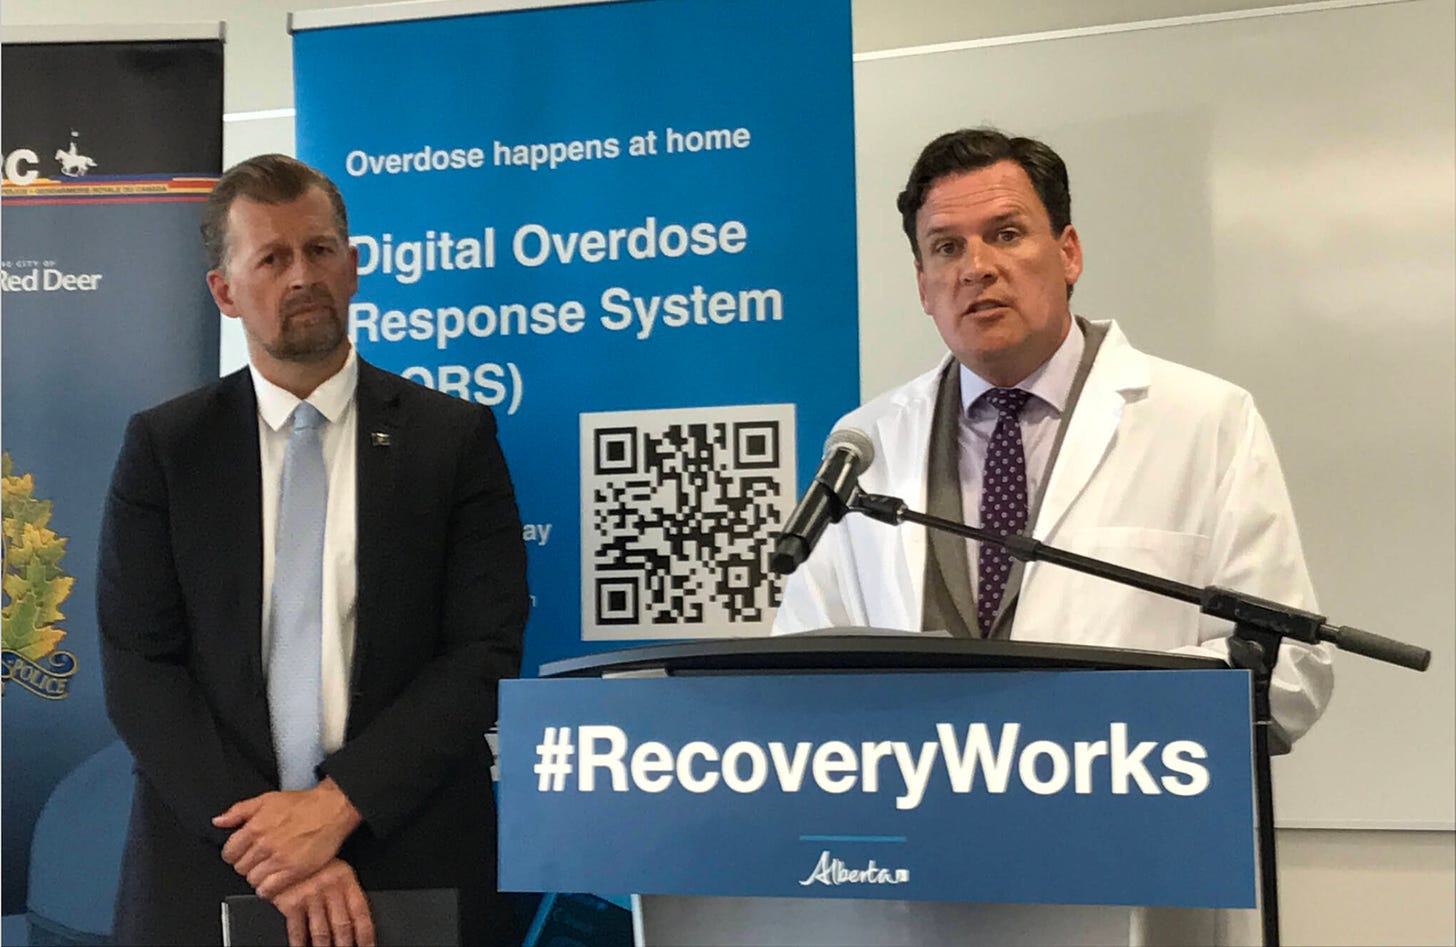 Minister of public safety Mike Ellis stands behind Dr. Nathaniel day, who speaks at the podium marked #RecoveryWorks. In Behind, A Banner reads Overdose Happens At Home, Digital Overdose Response System